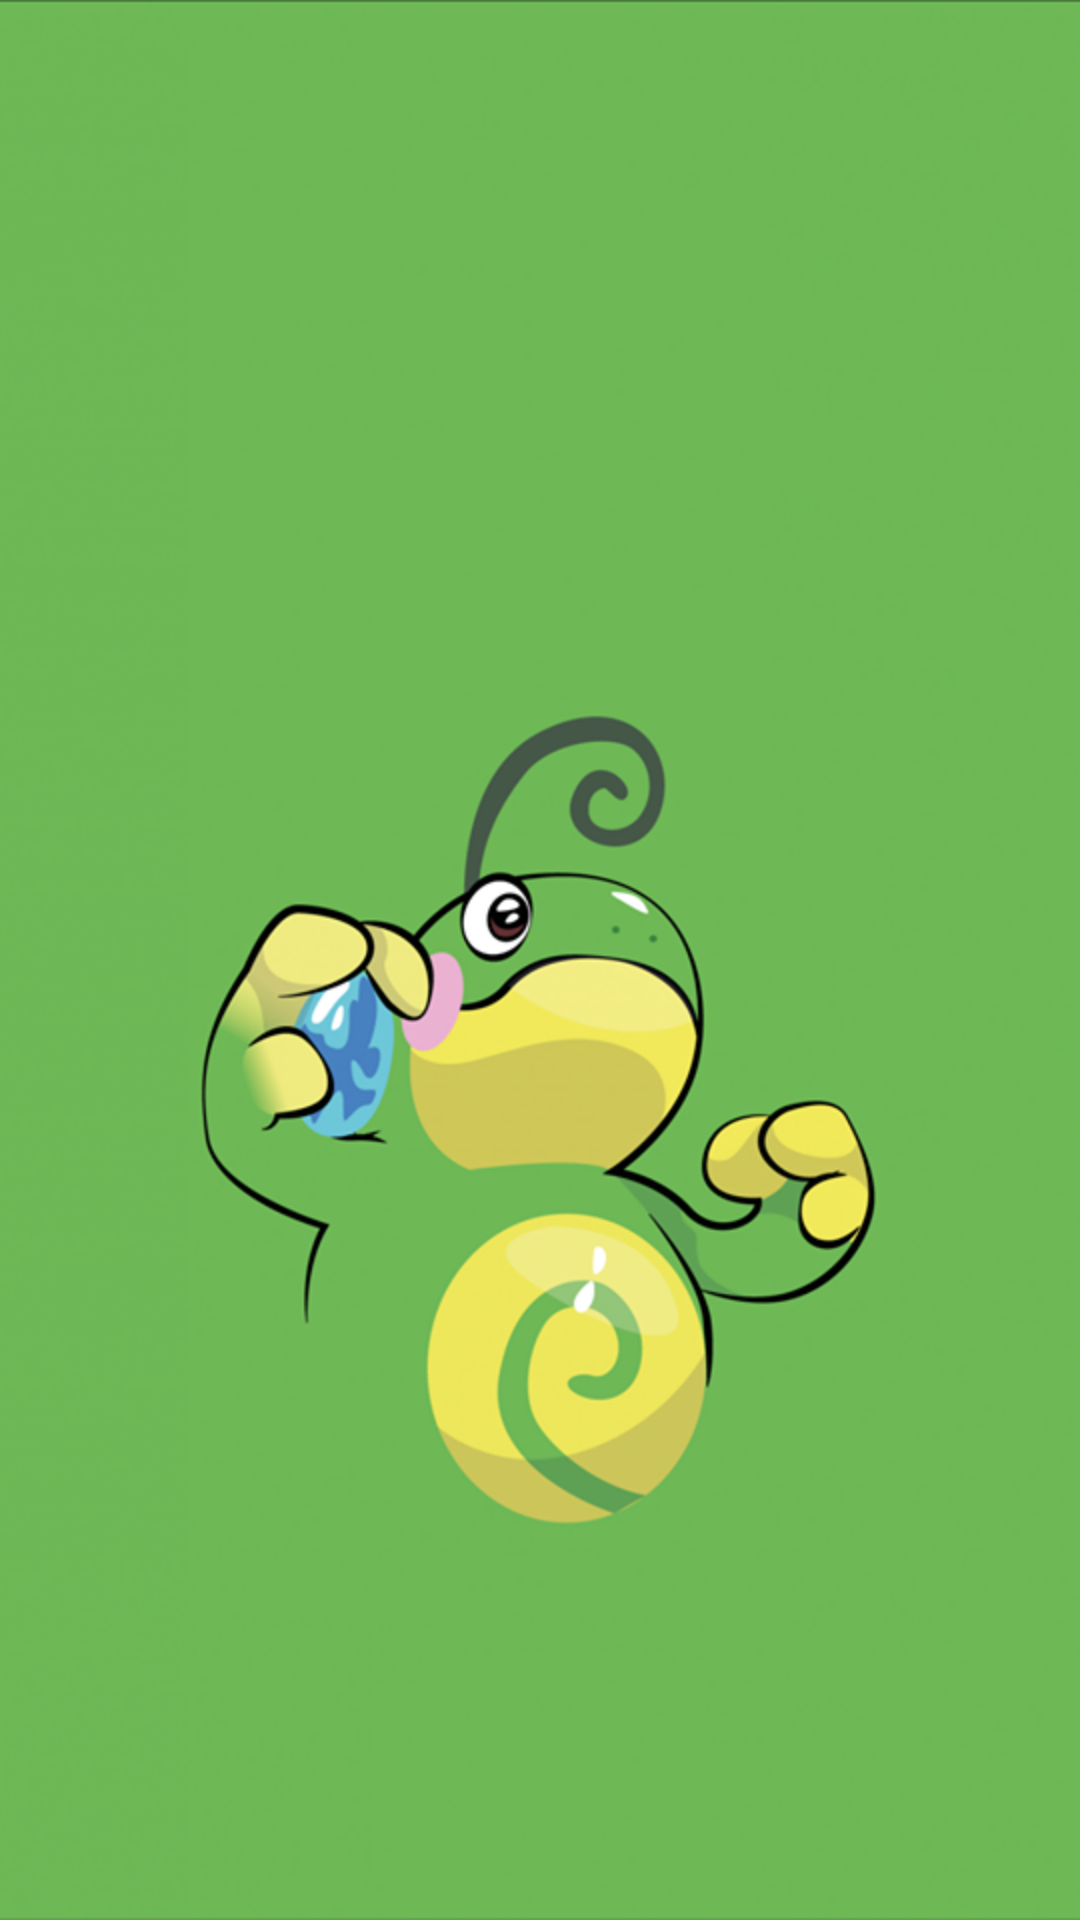 Download Politoed 1080 x 1920 Wallpapers – 4678888 – POKEMON …